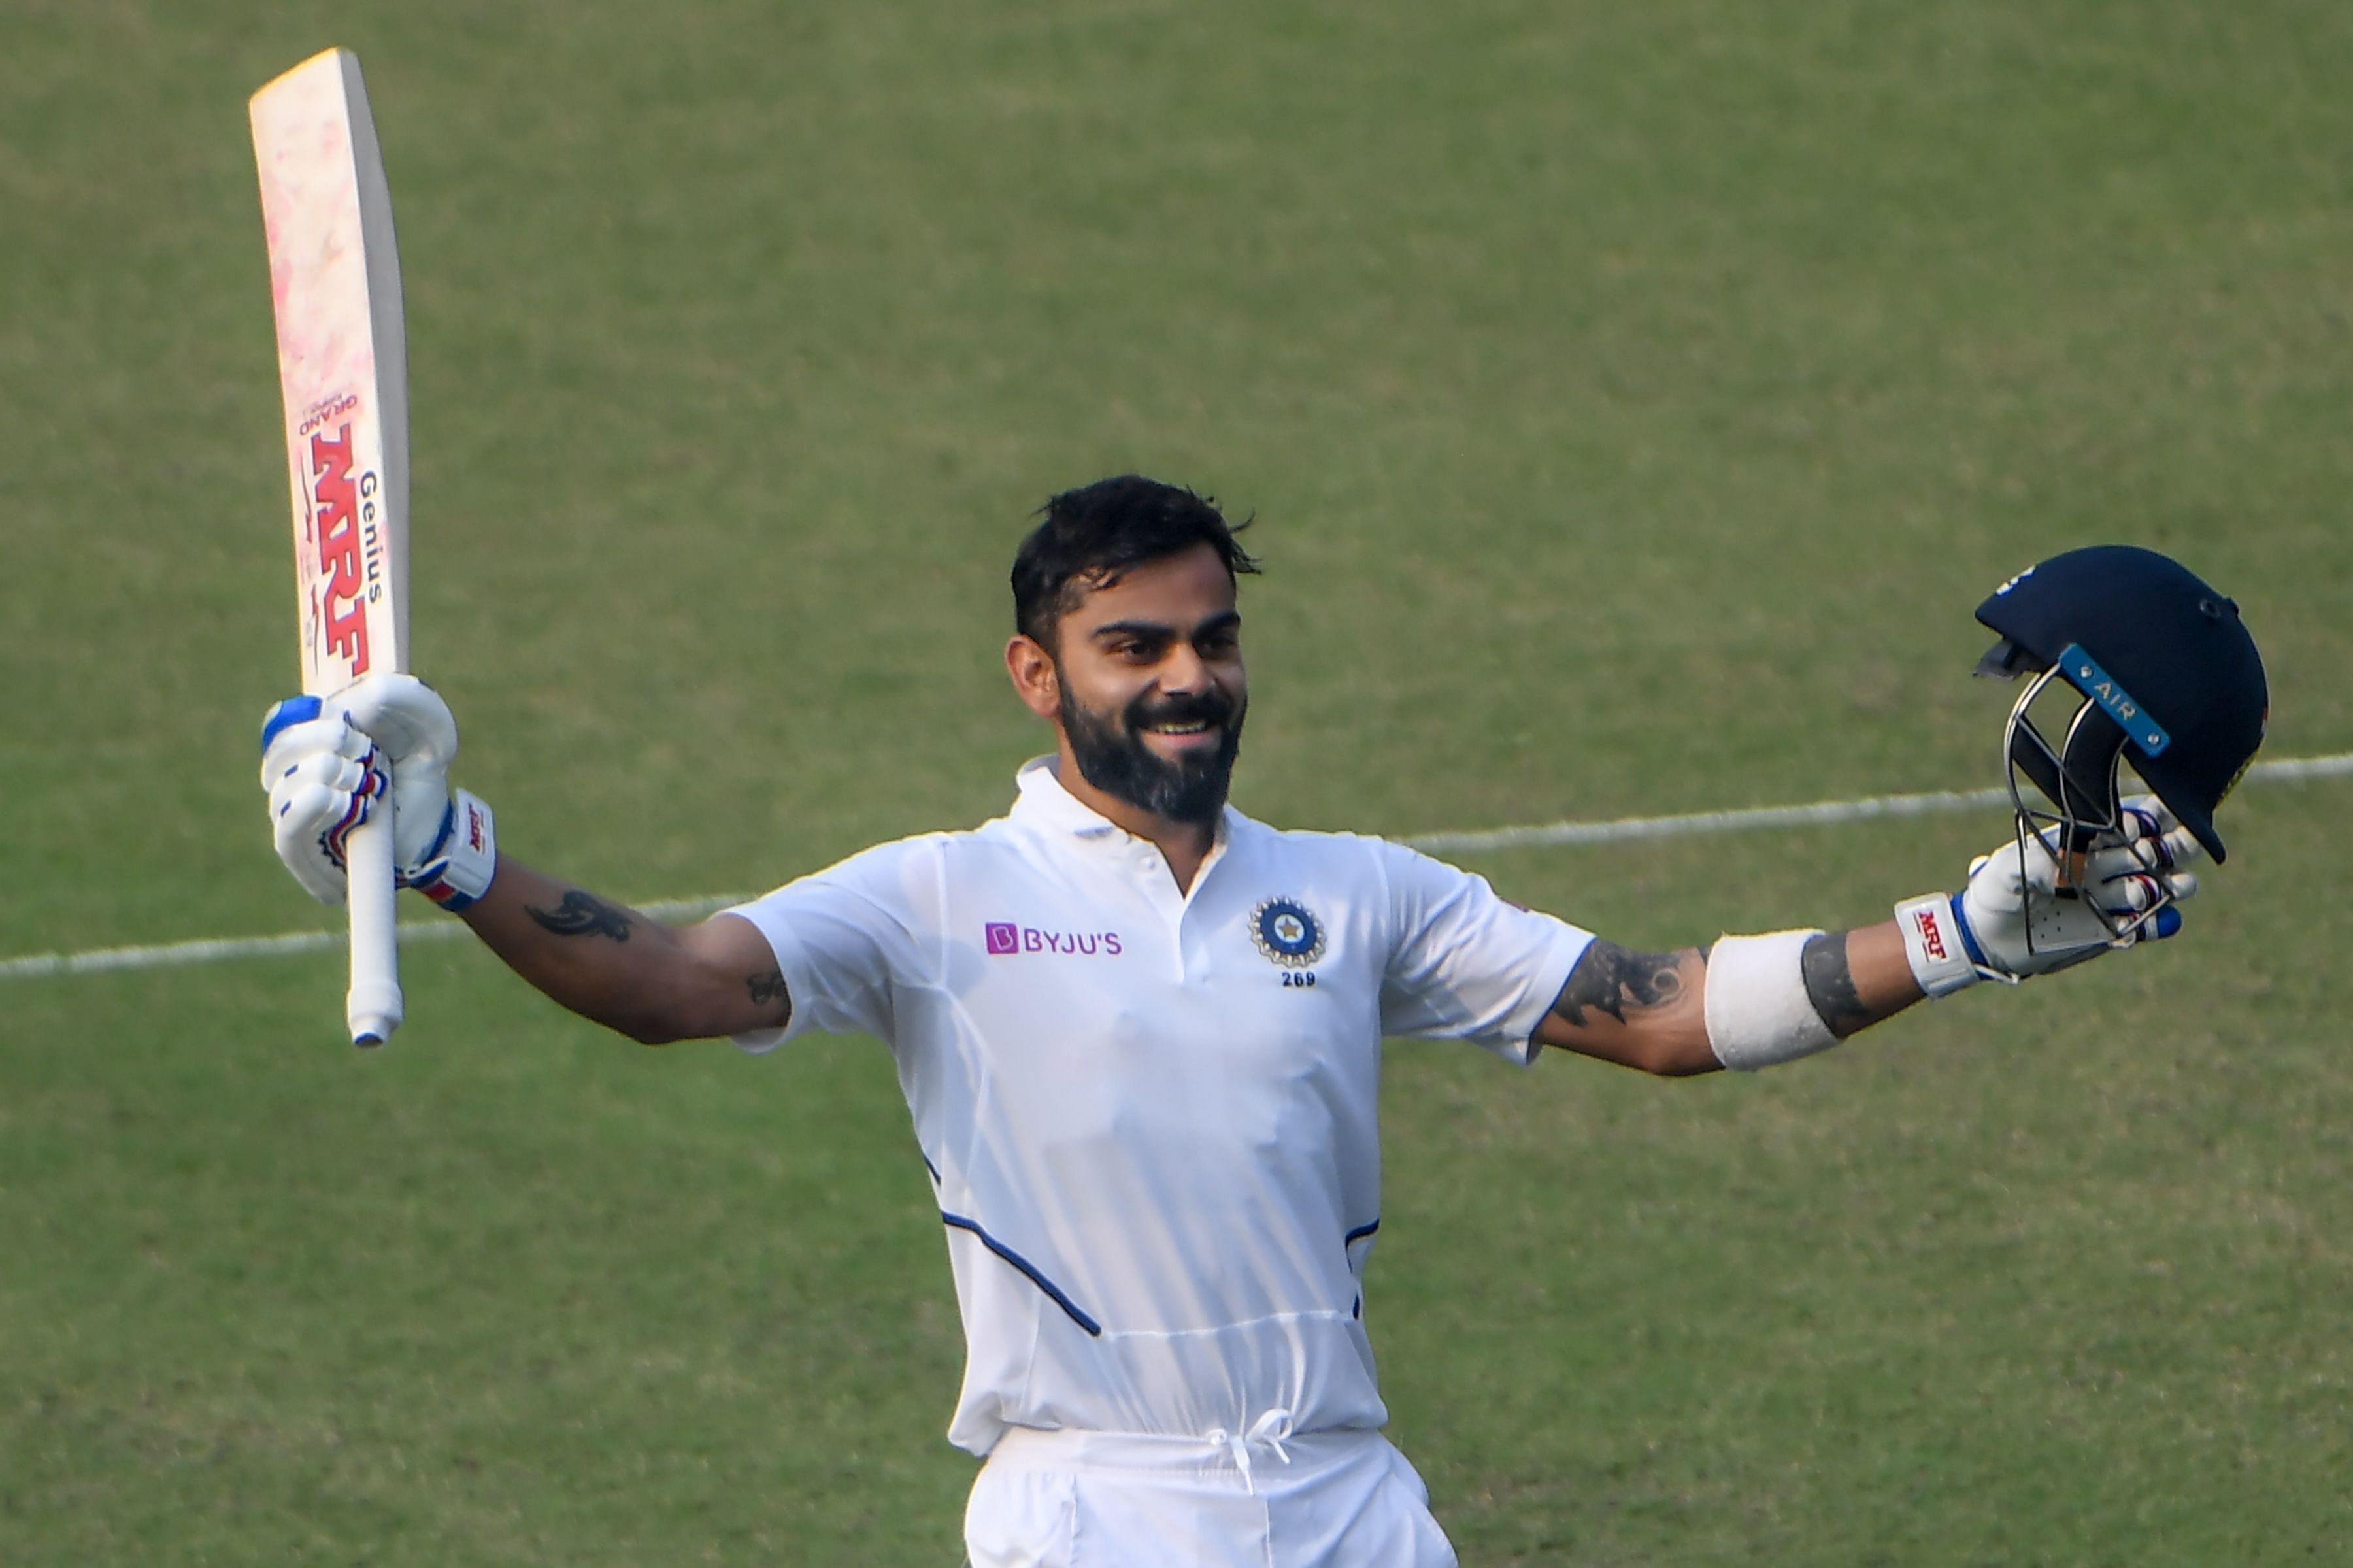 India's captain Virat Kohli celebrates his century (100 runs) during the second day of the second Test cricket match of a two-match series between India and Bangladesh at the Eden Gardens cricket stadium in Kolkata. (AFP Photo) 